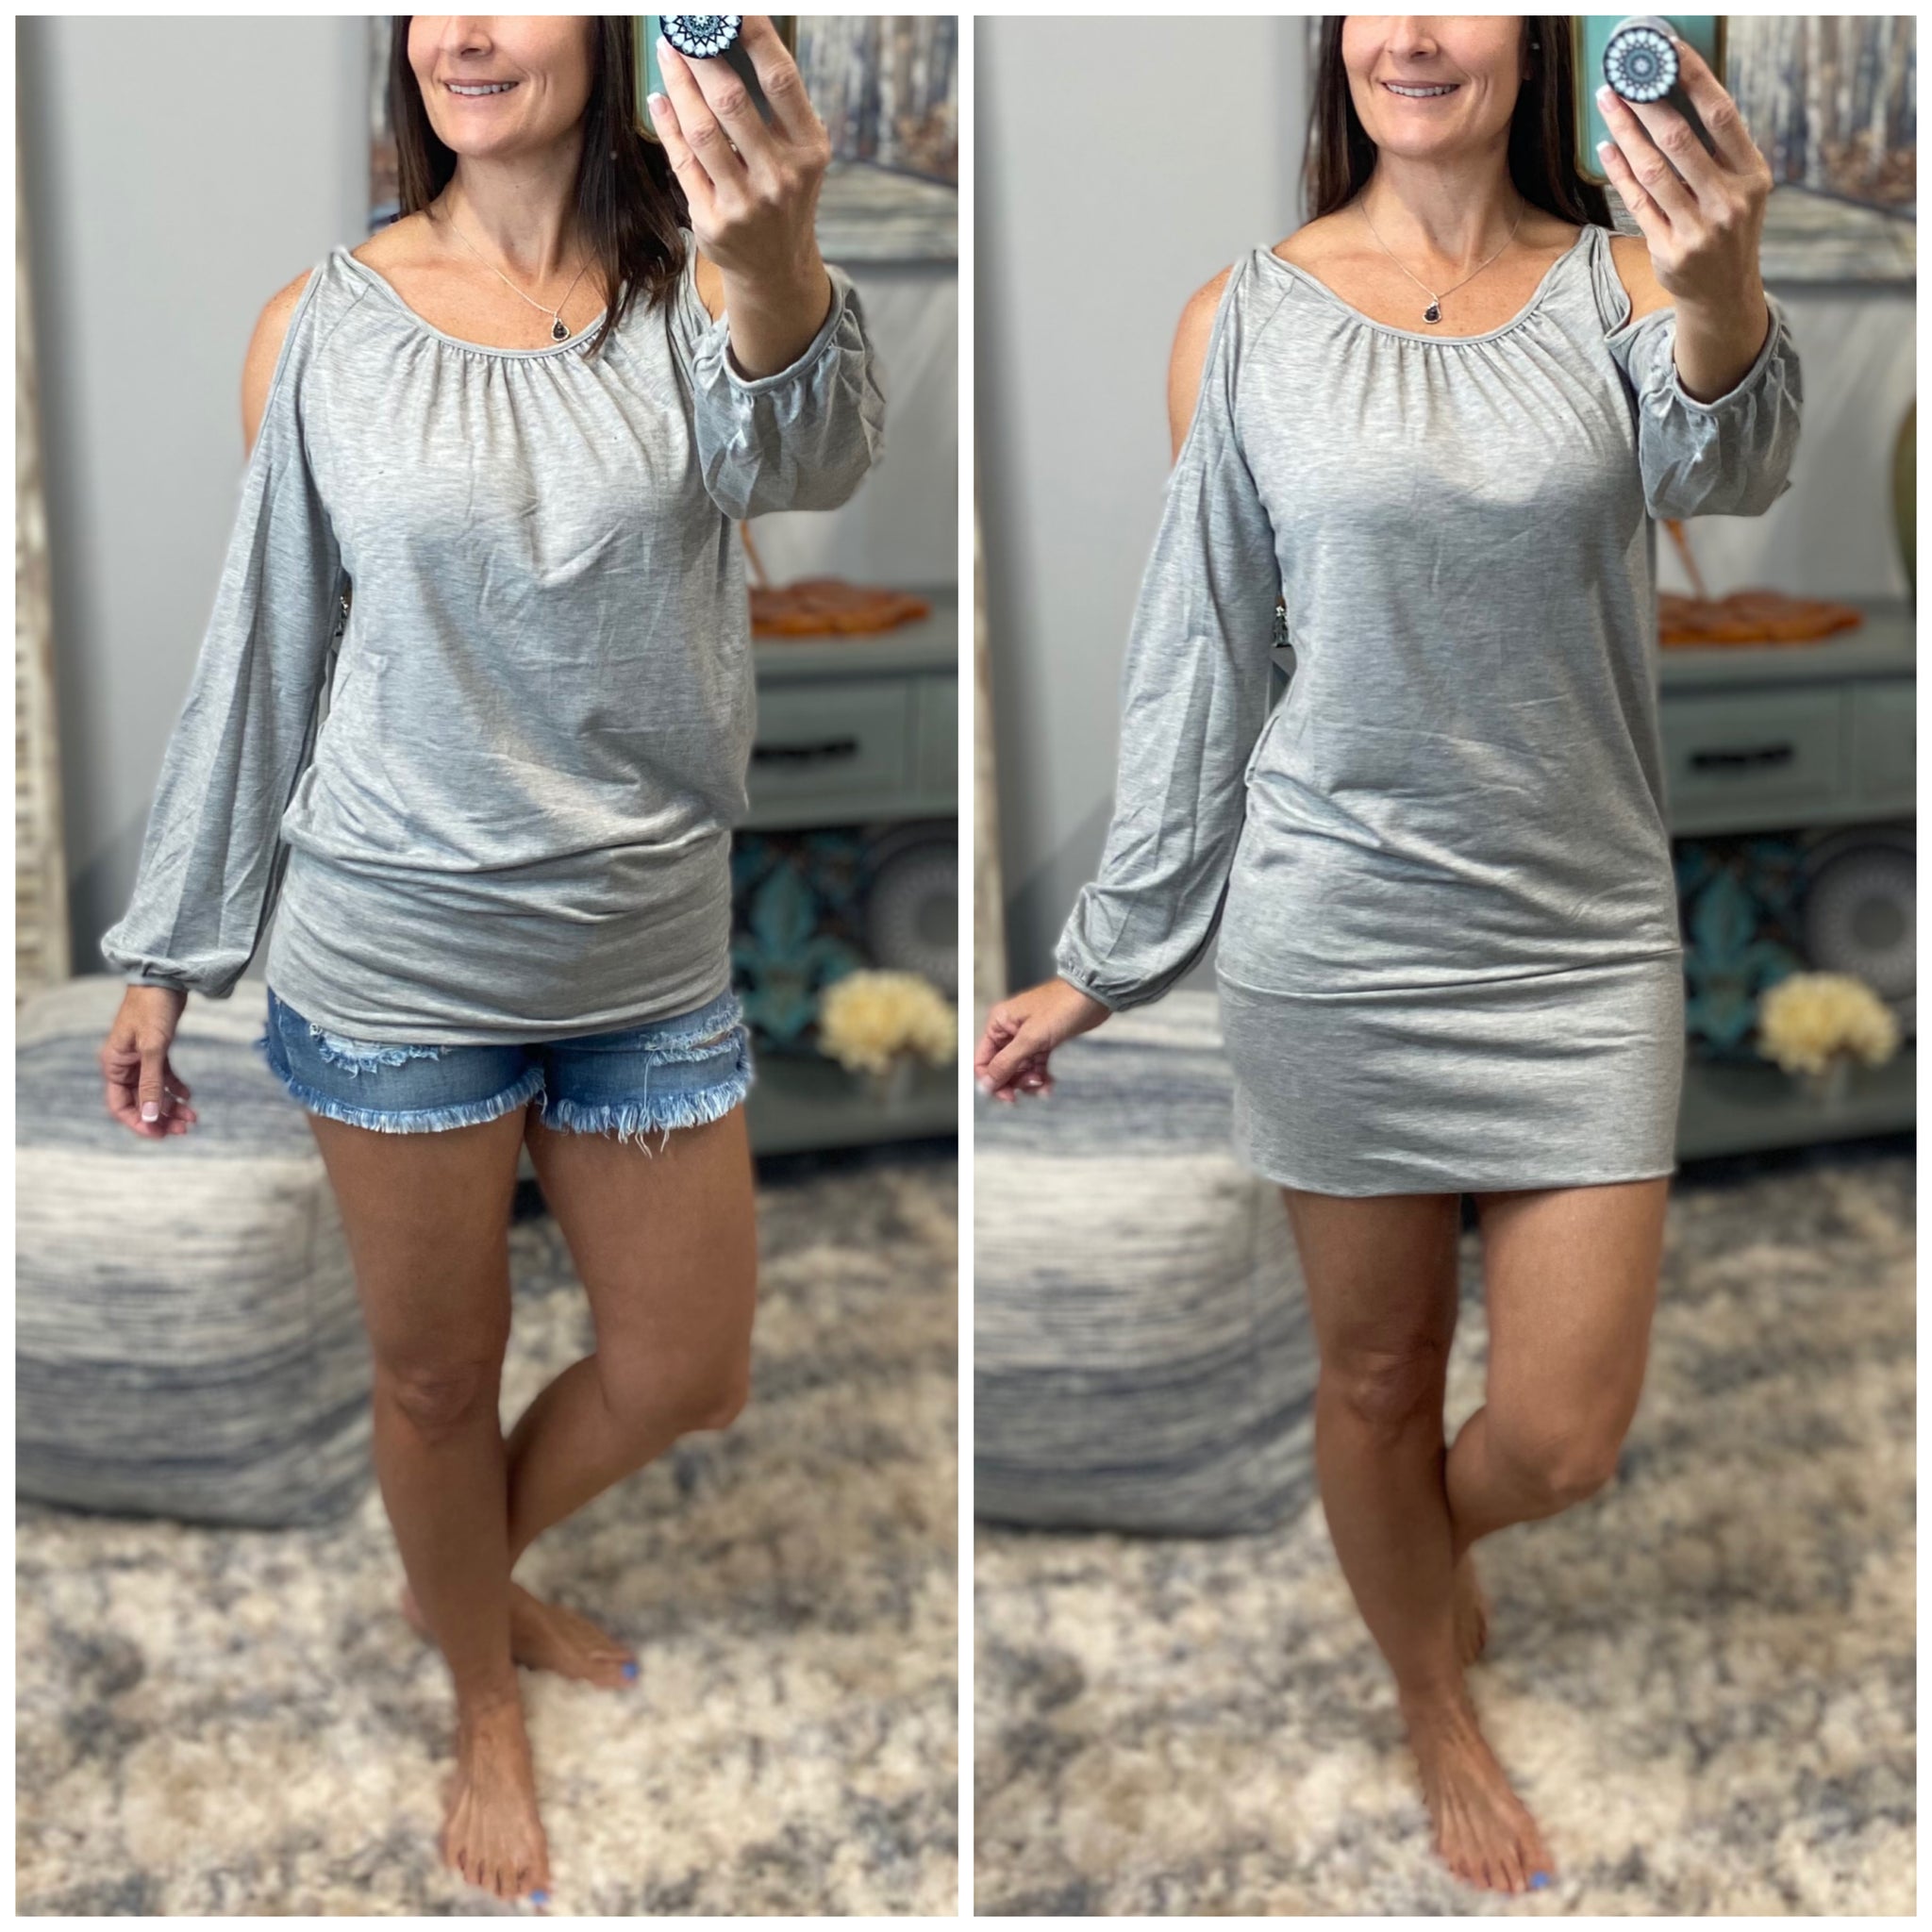 “Bad Decisions” Cold Shoulder Long Sleeve Ruching Detail Banded Gray Top Dress S/M/L/XL